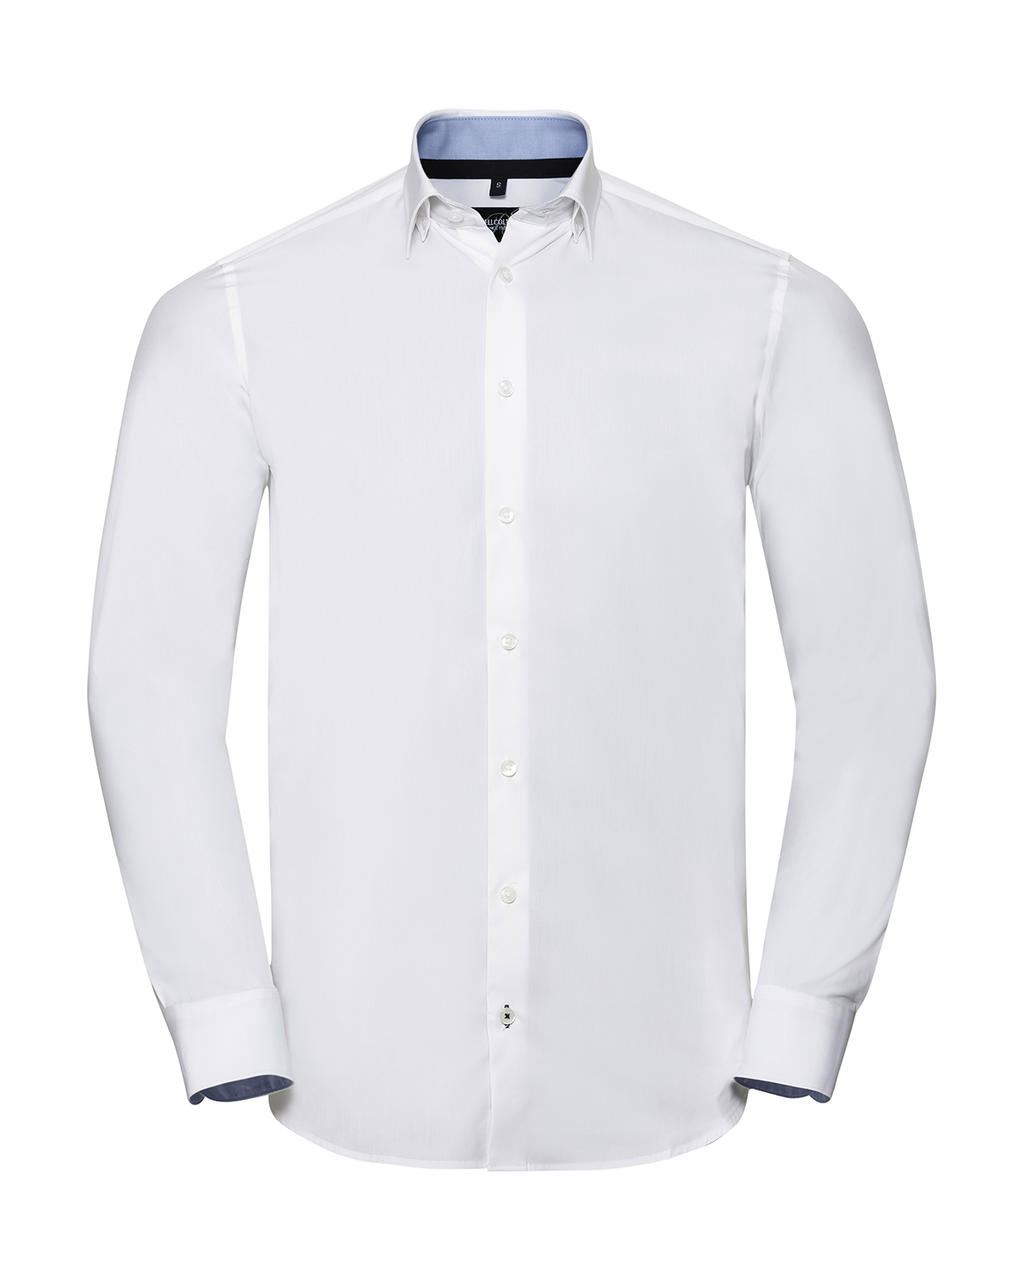 Men's LS Tailored Contrast Ultimate Stretch Shirt